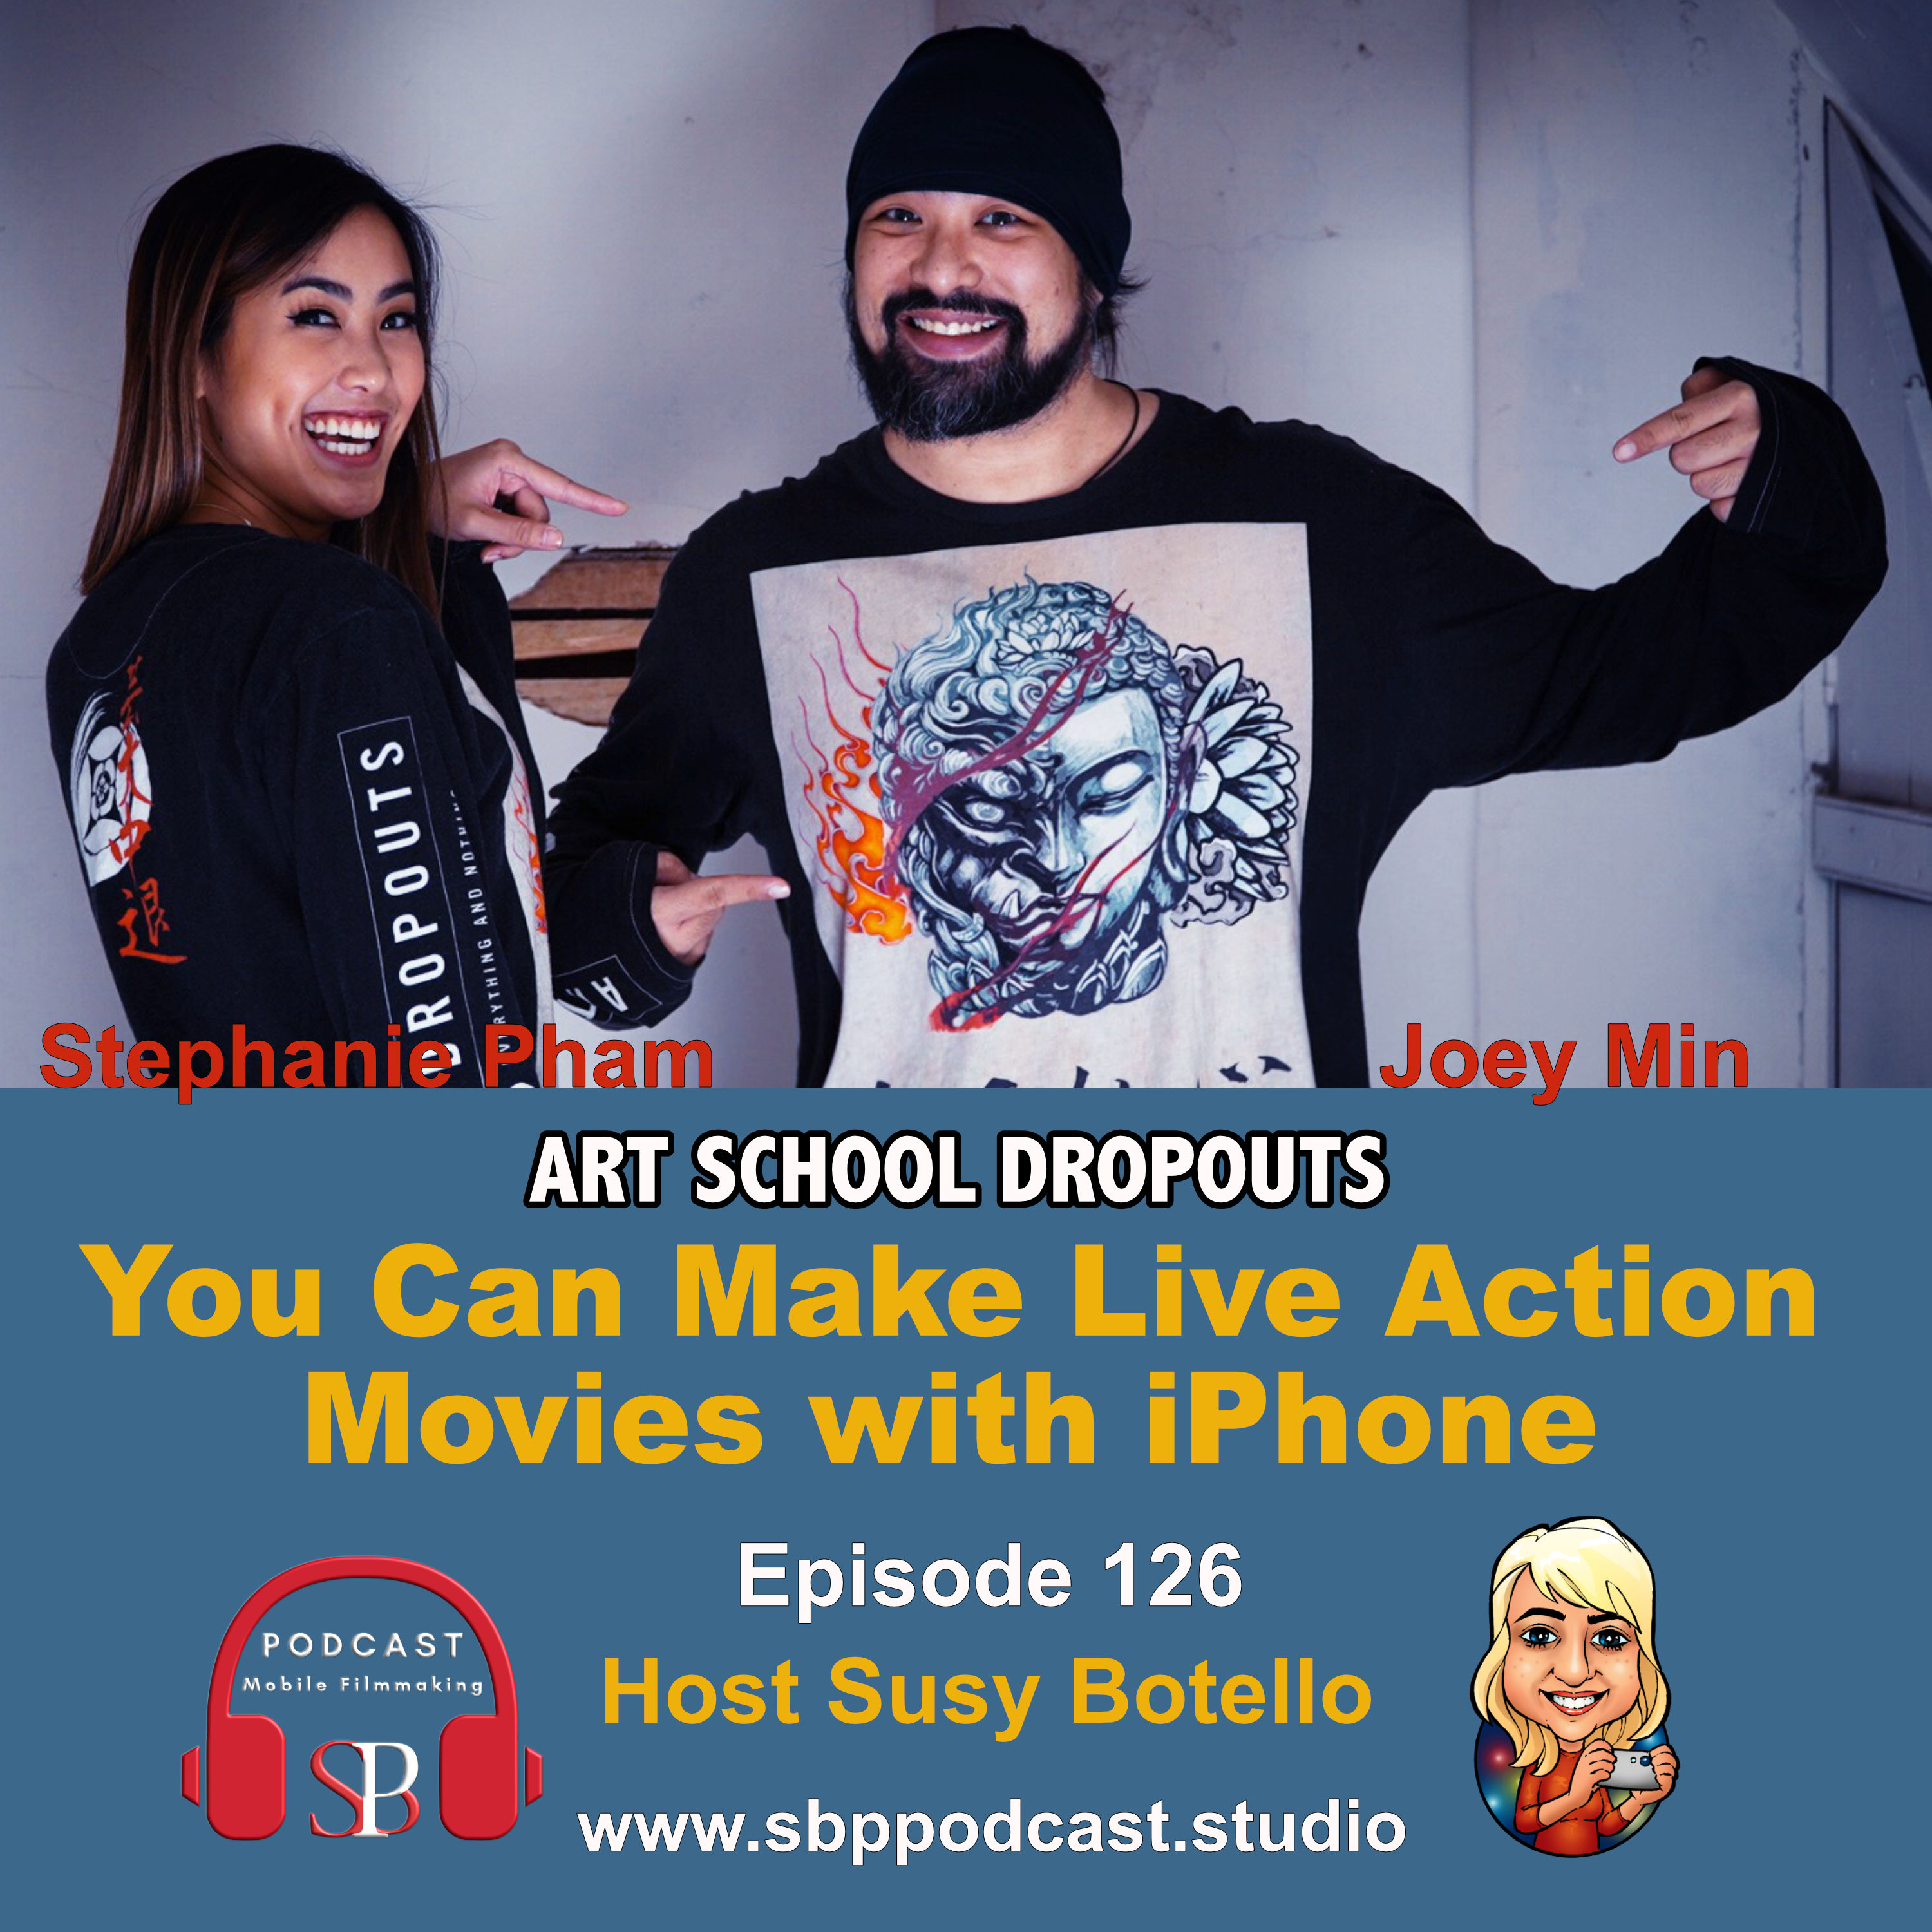 You Can Shoot A Live Action Film with iPhone with Art School Dropouts Image